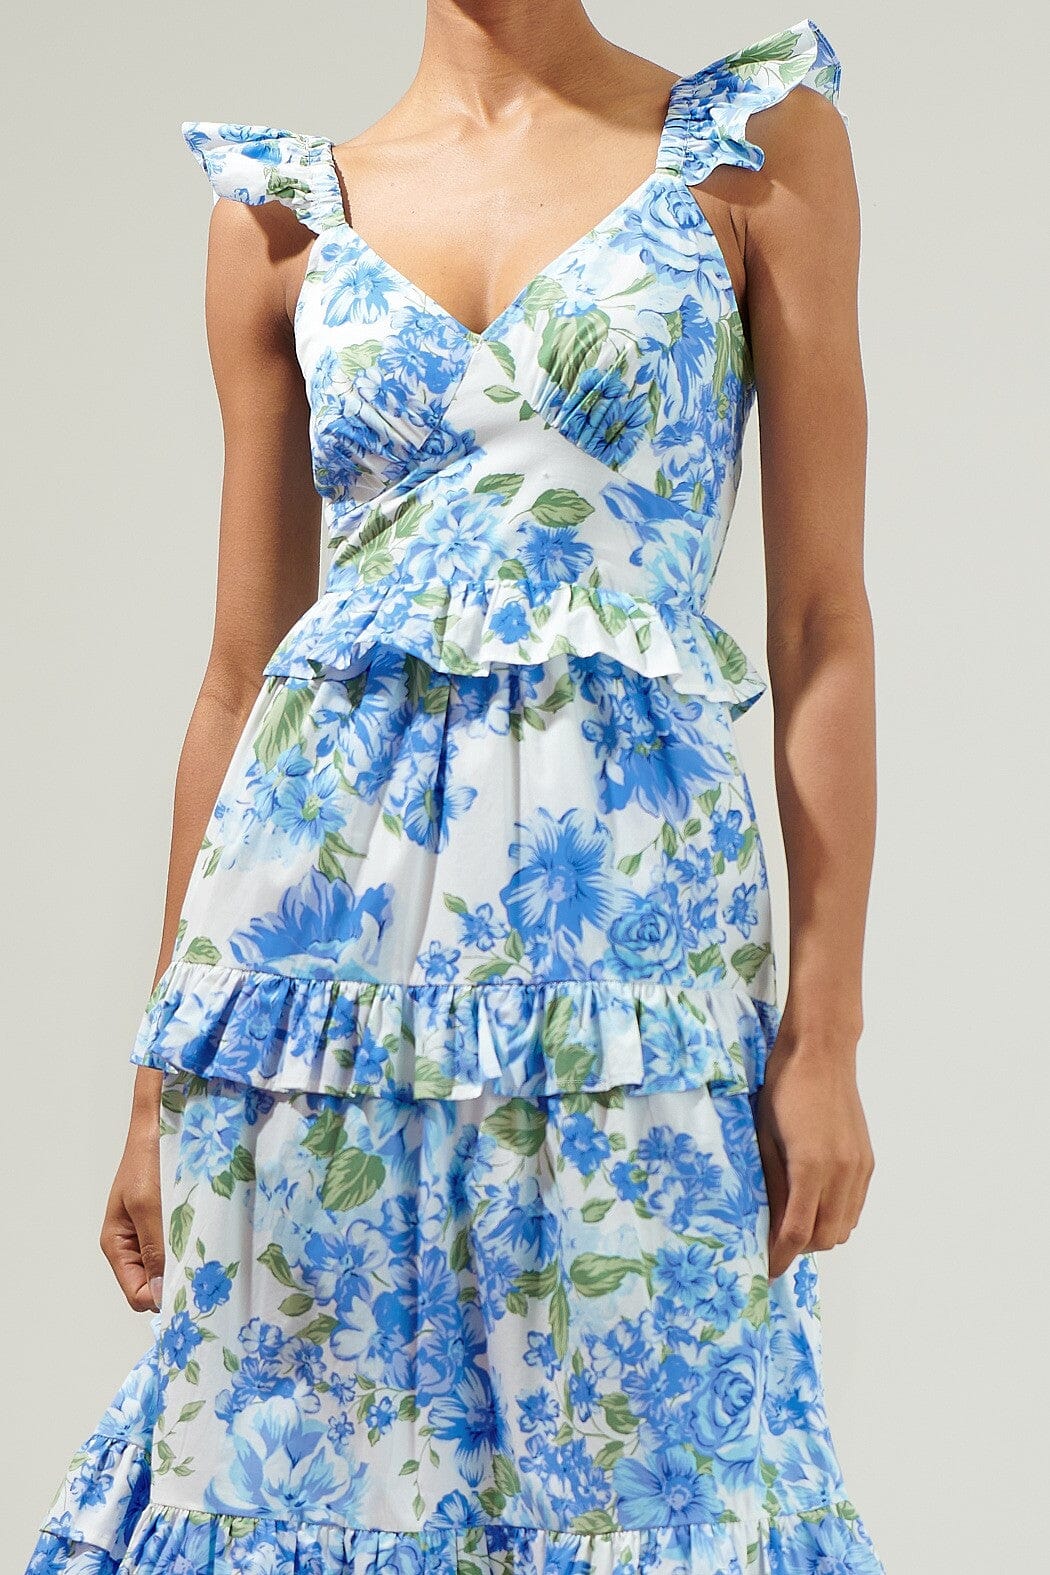 Truth Be Told Blue Floral Tiered Midi Dress Sugarlips 